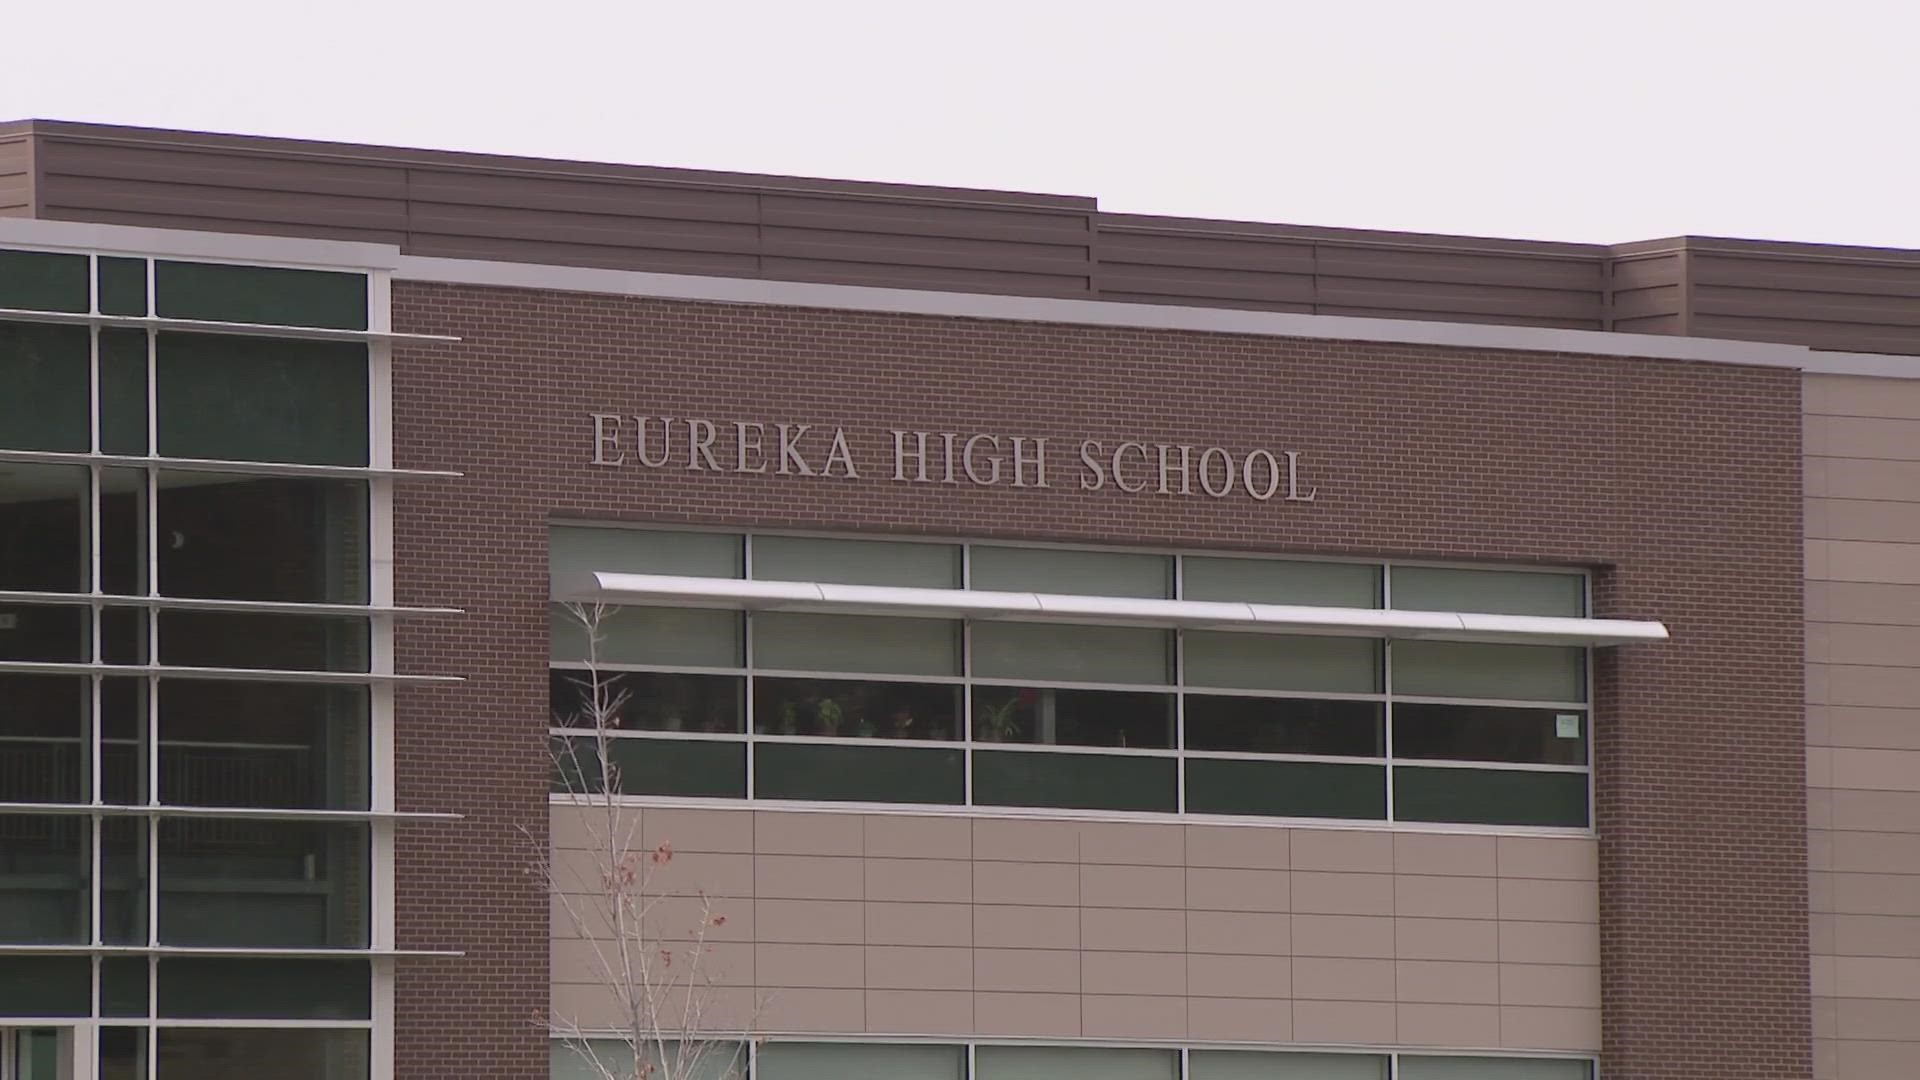 In an email, the principal of Eureka High School said they discovered a video of racist messages on school property. A parent says change needs to happen.